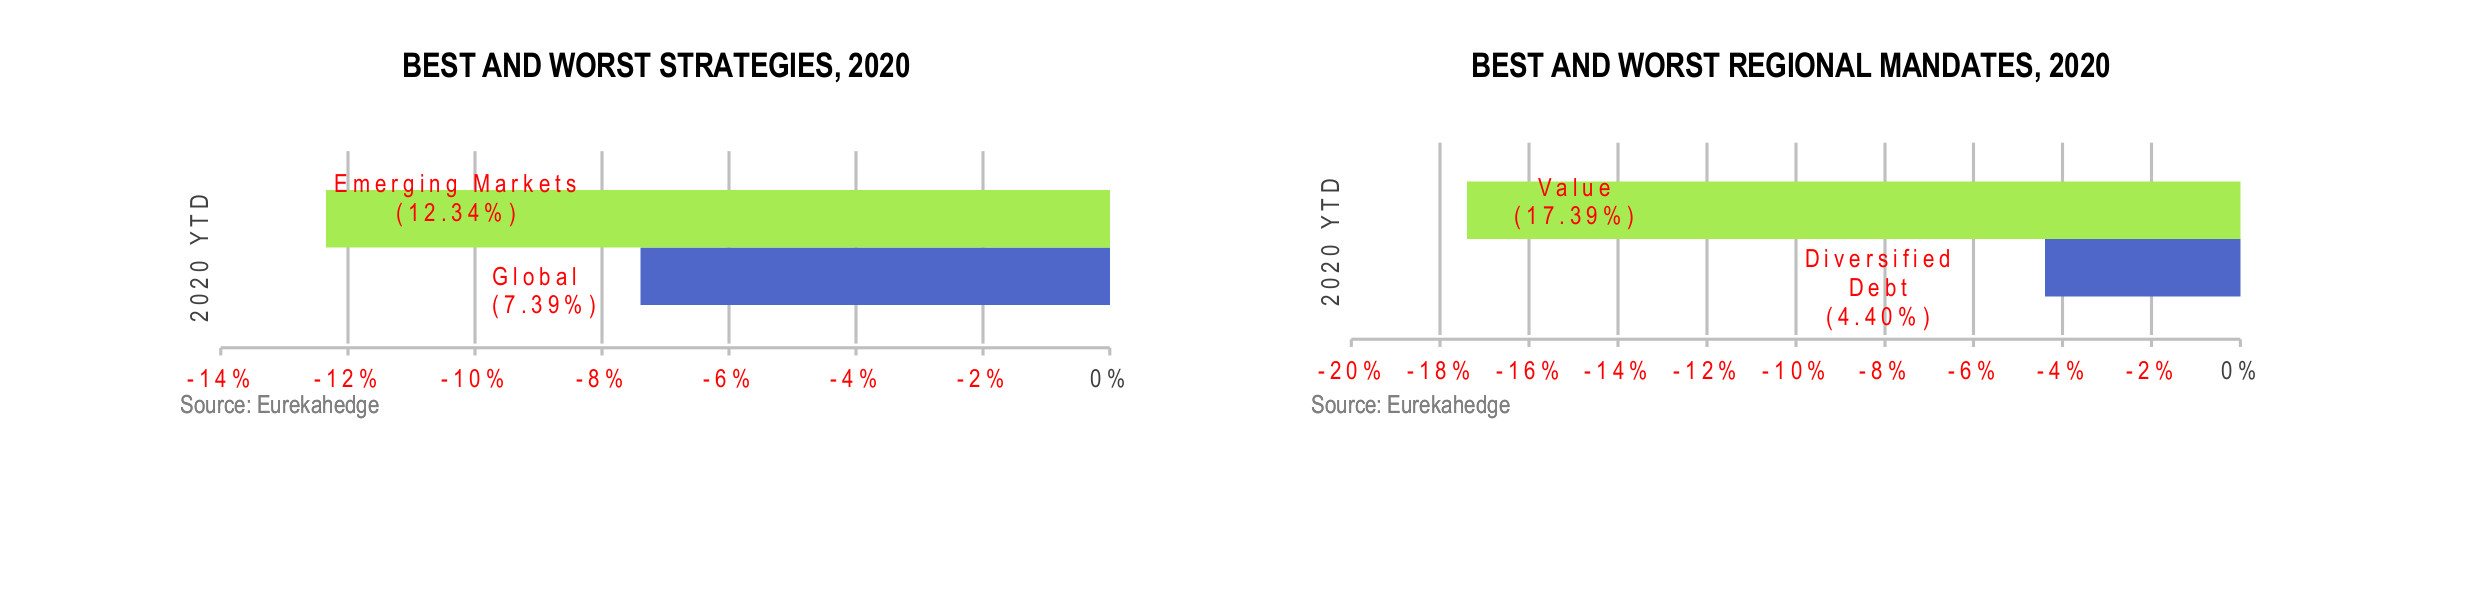 Long-only Absolute Return Funds Infographic July 2020 - best and worst strategy and regional mandate 2020